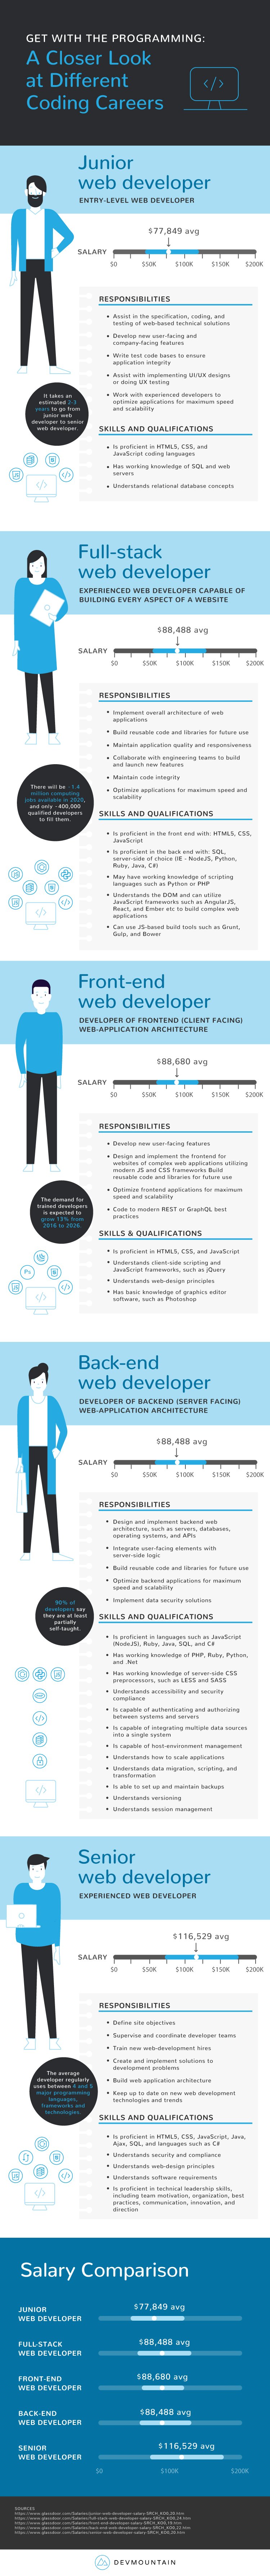 Infographic: A Closer Look at Different Coding Careers